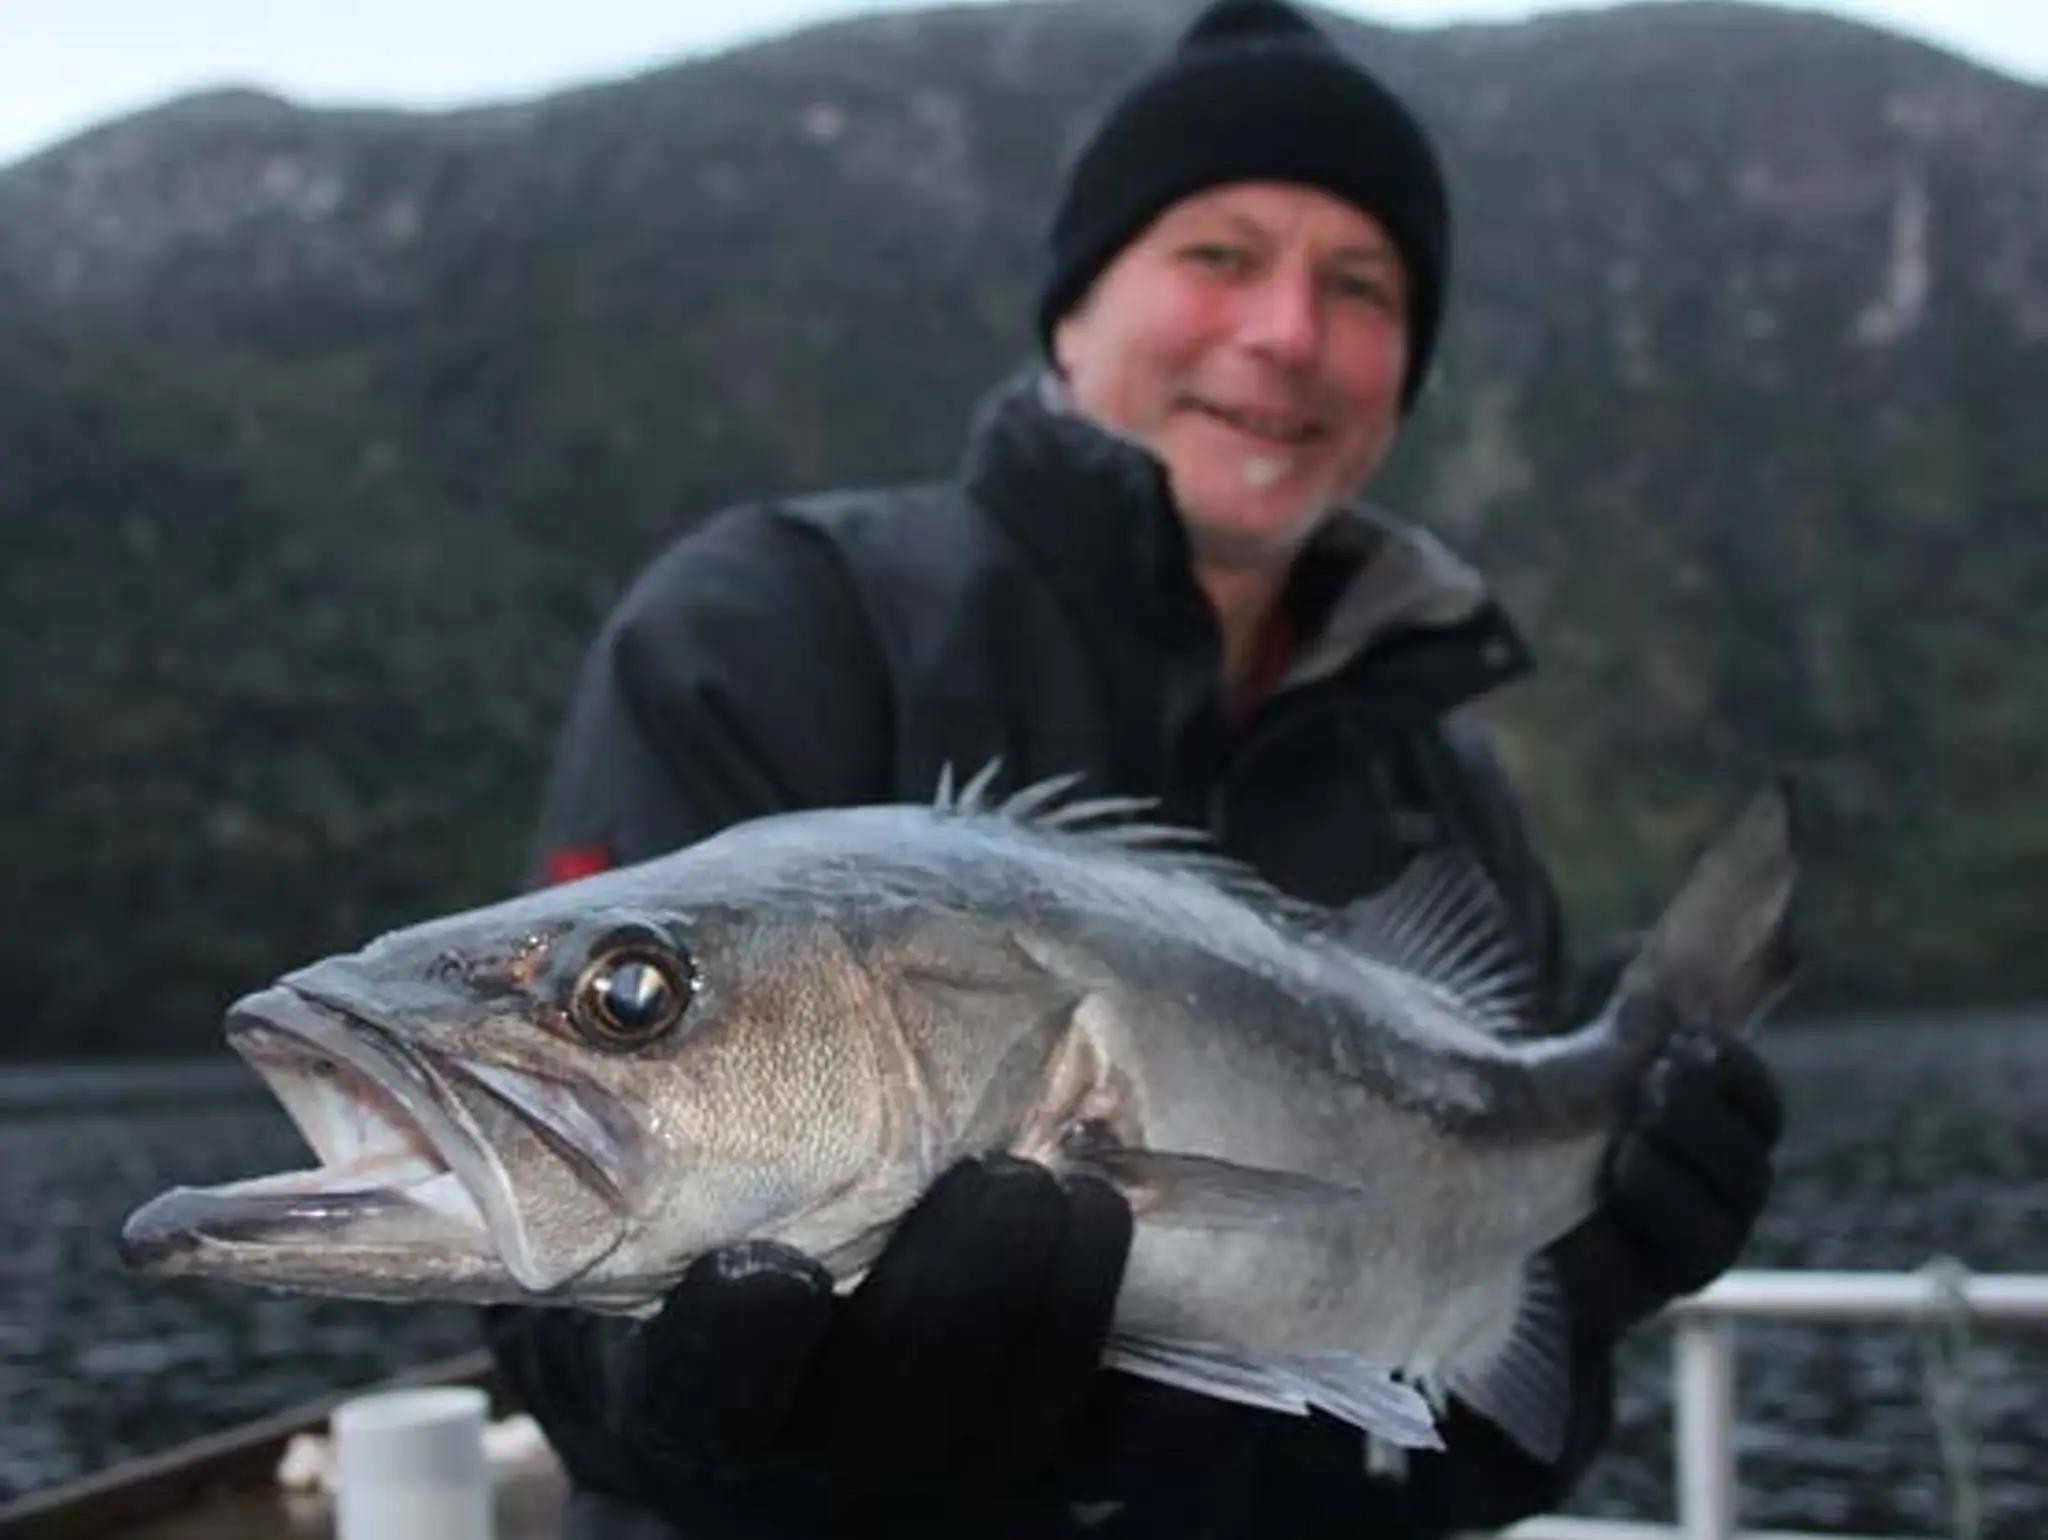 NEW RULES FOR FIORDLAND FISHERY